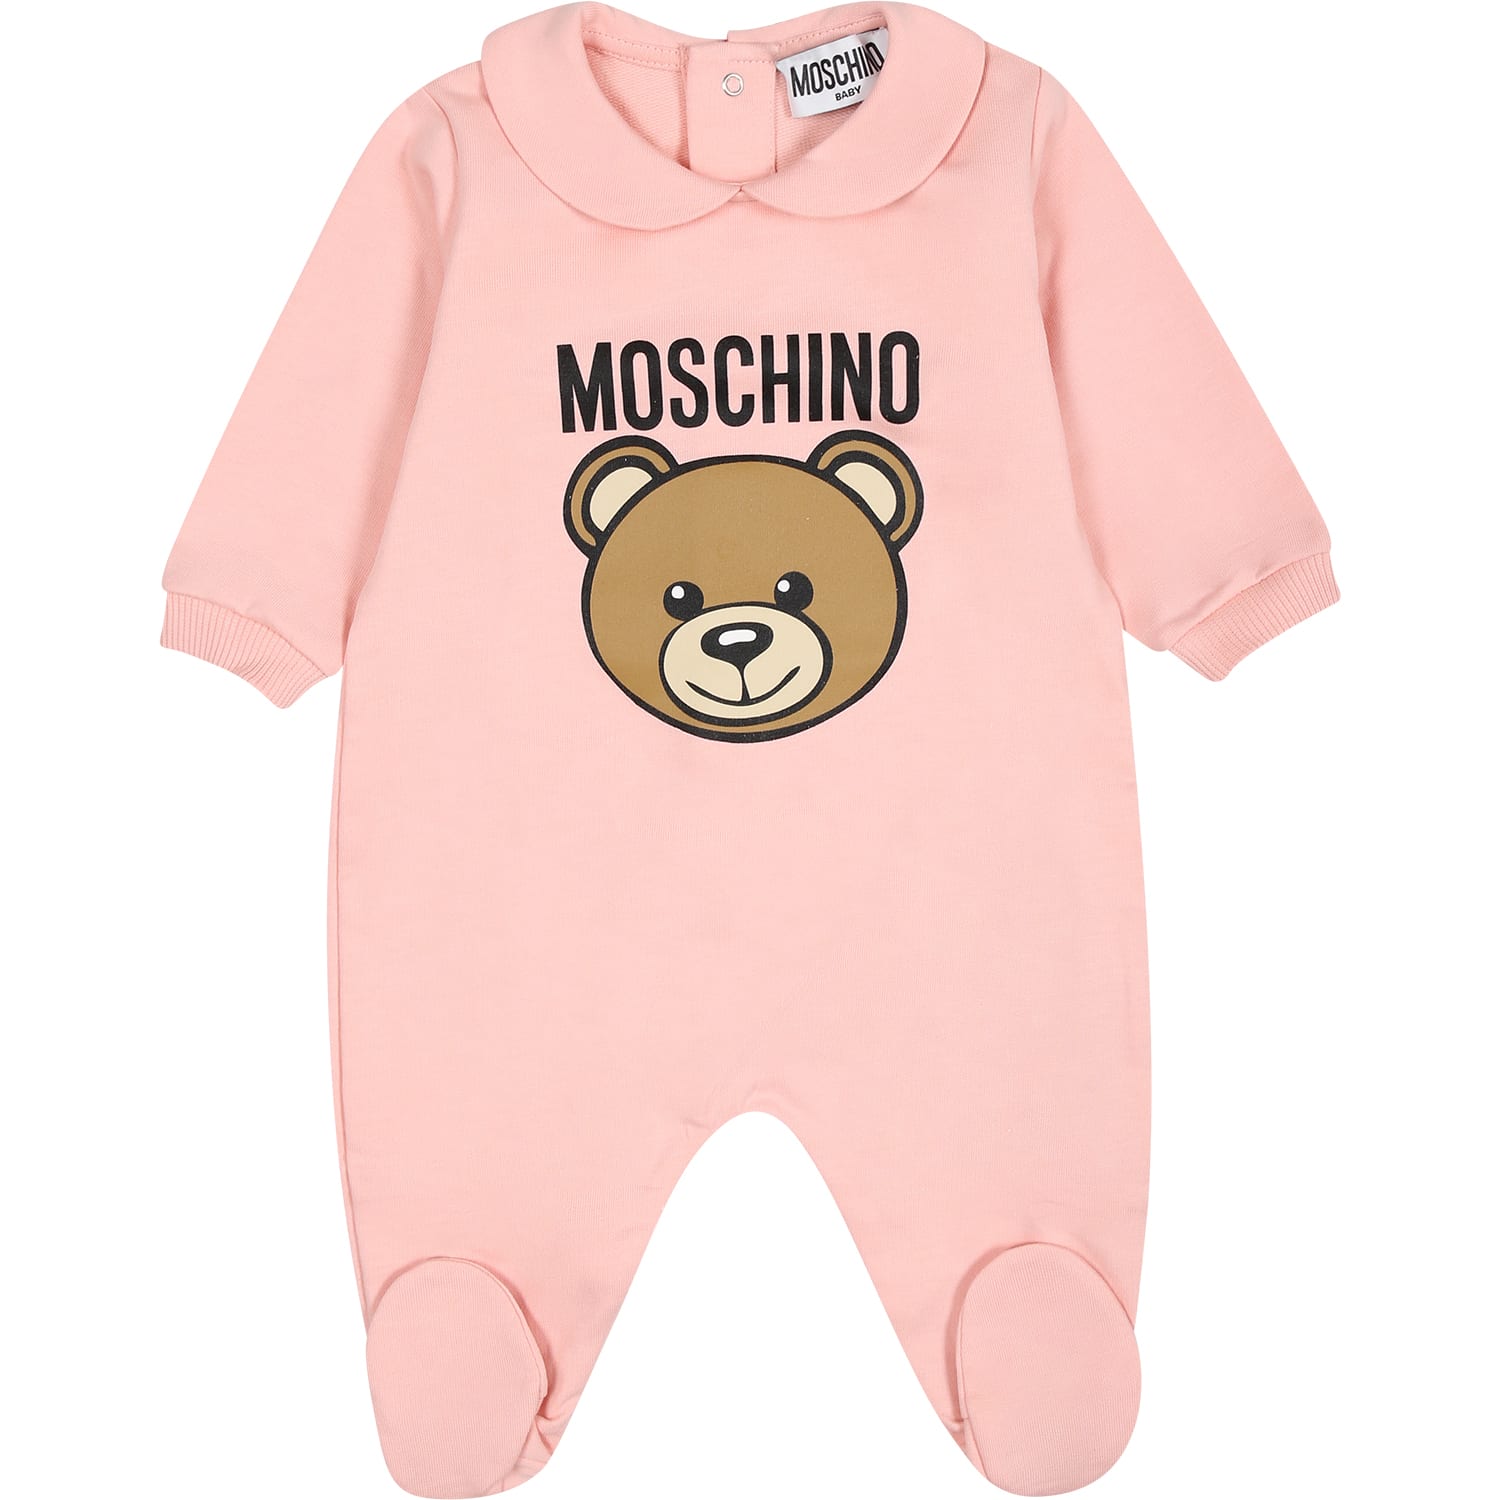 Moschino Pink Babygrow For Baby Girl With Teddy Bear